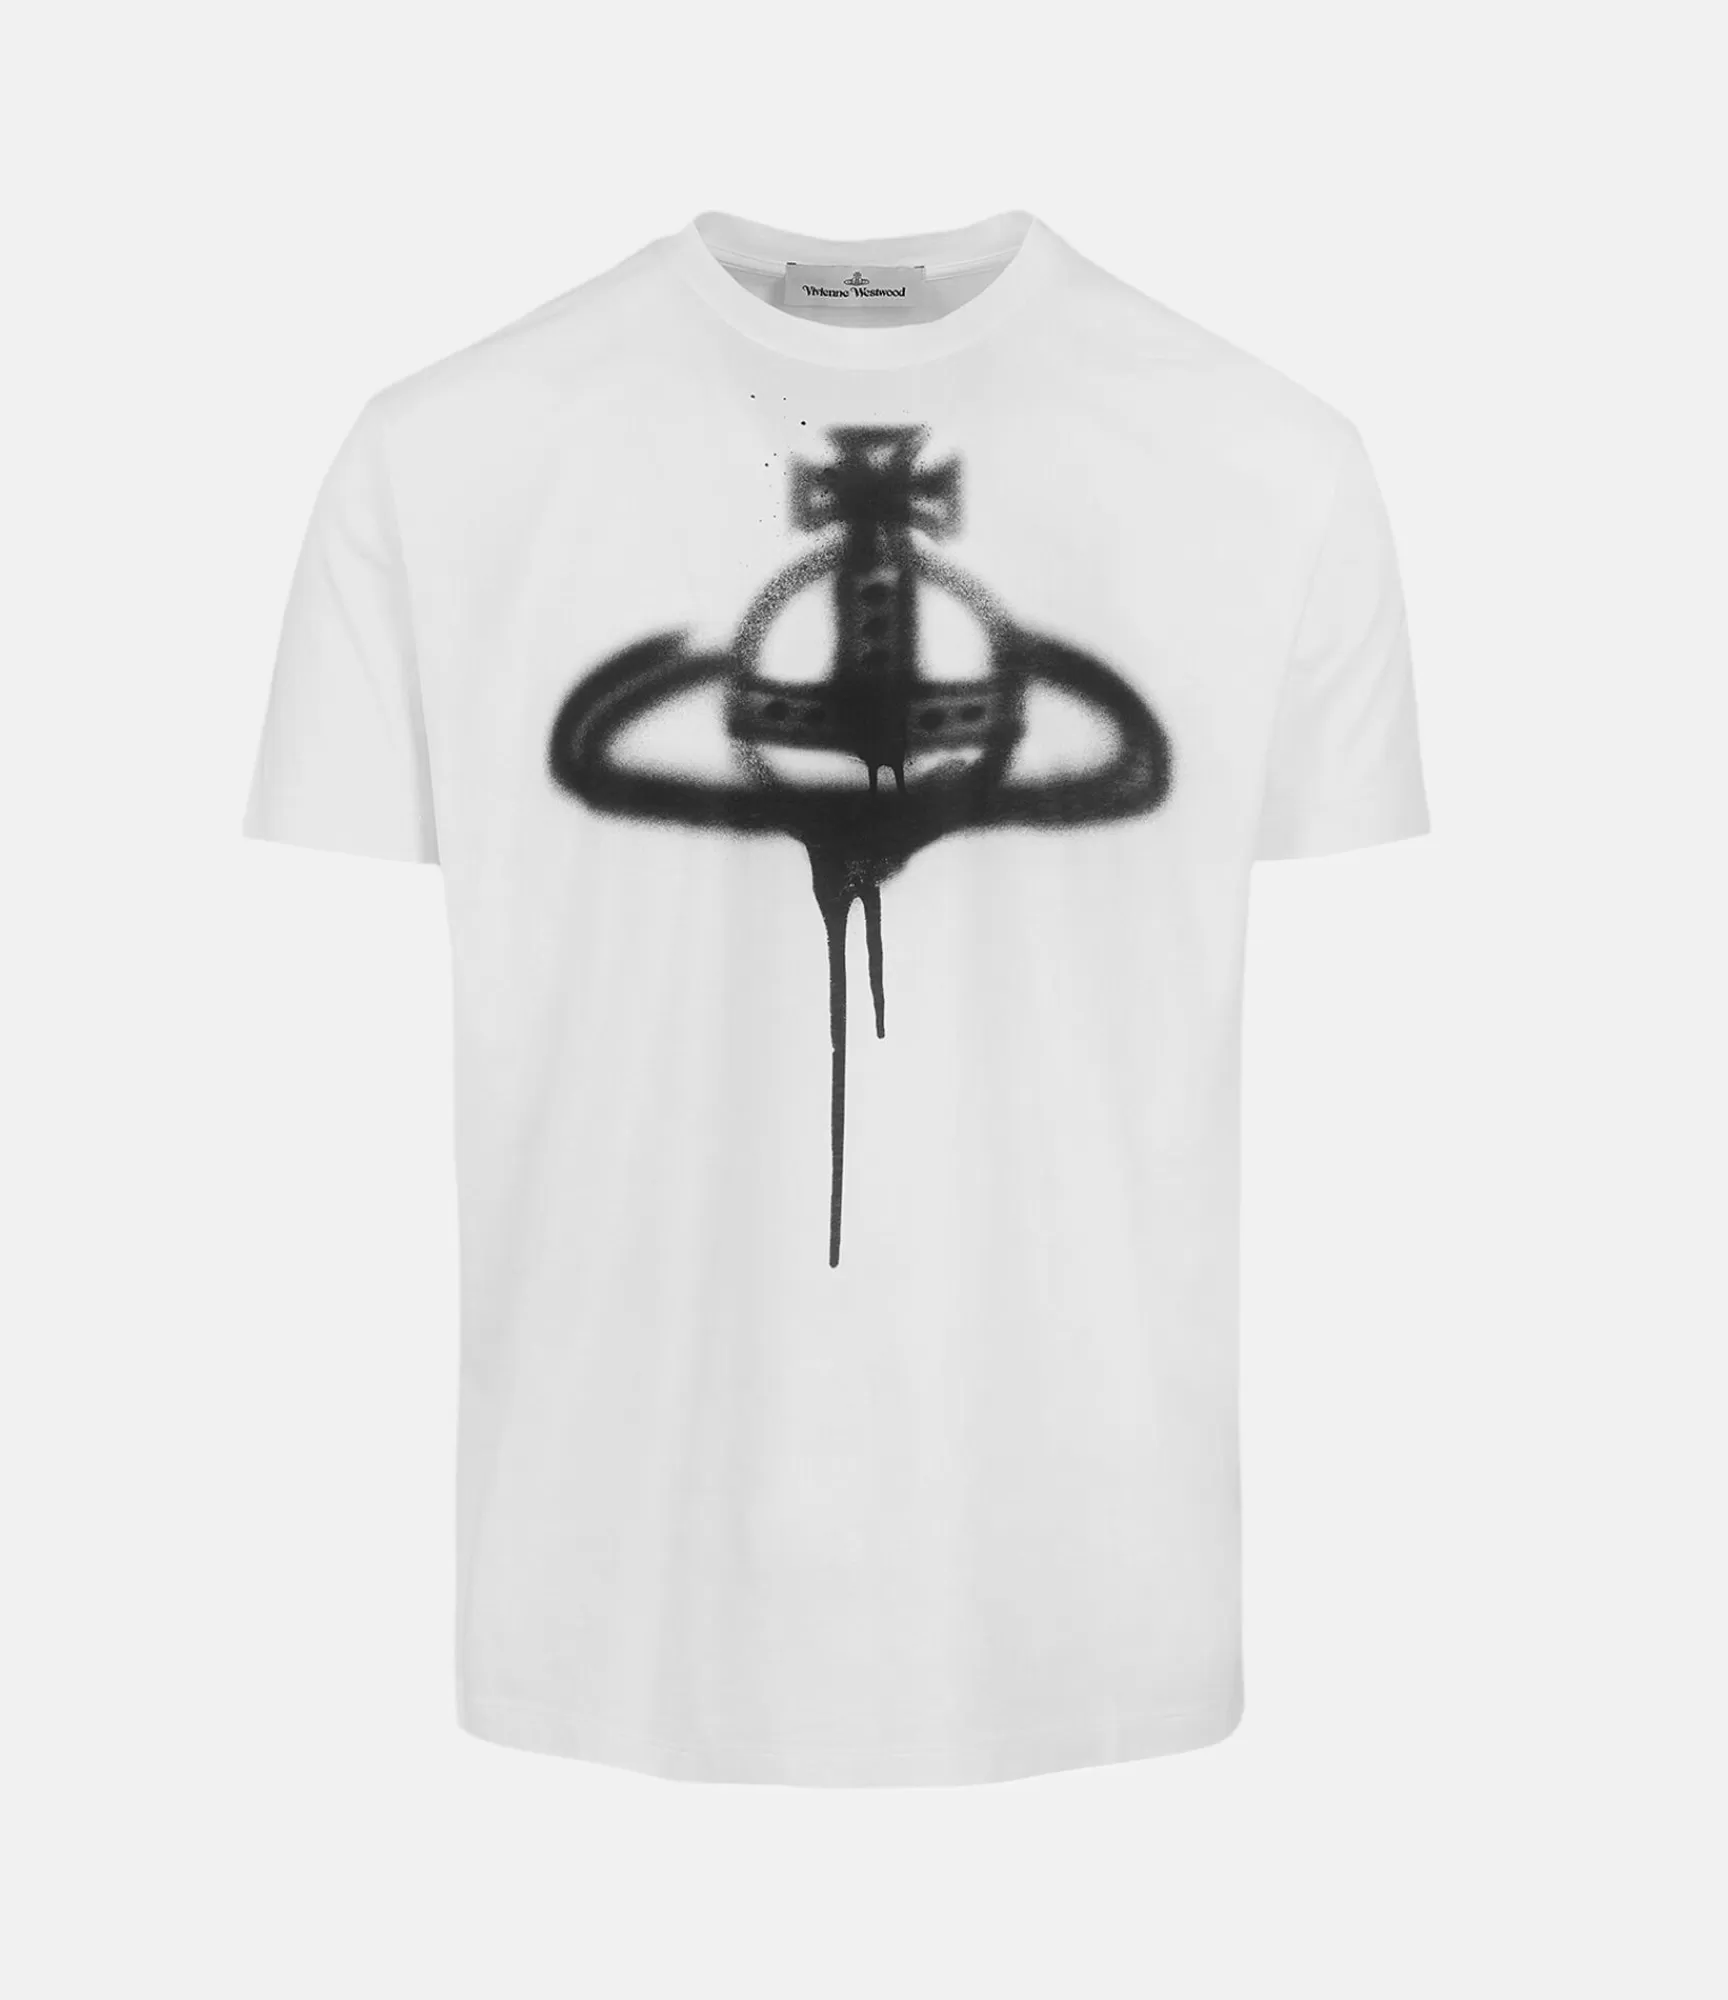 Vivienne Westwood T-Shirts and Polos | Sweatshirts and T-Shirts*SPRAY ORB CLASSIC T-SHIRT White